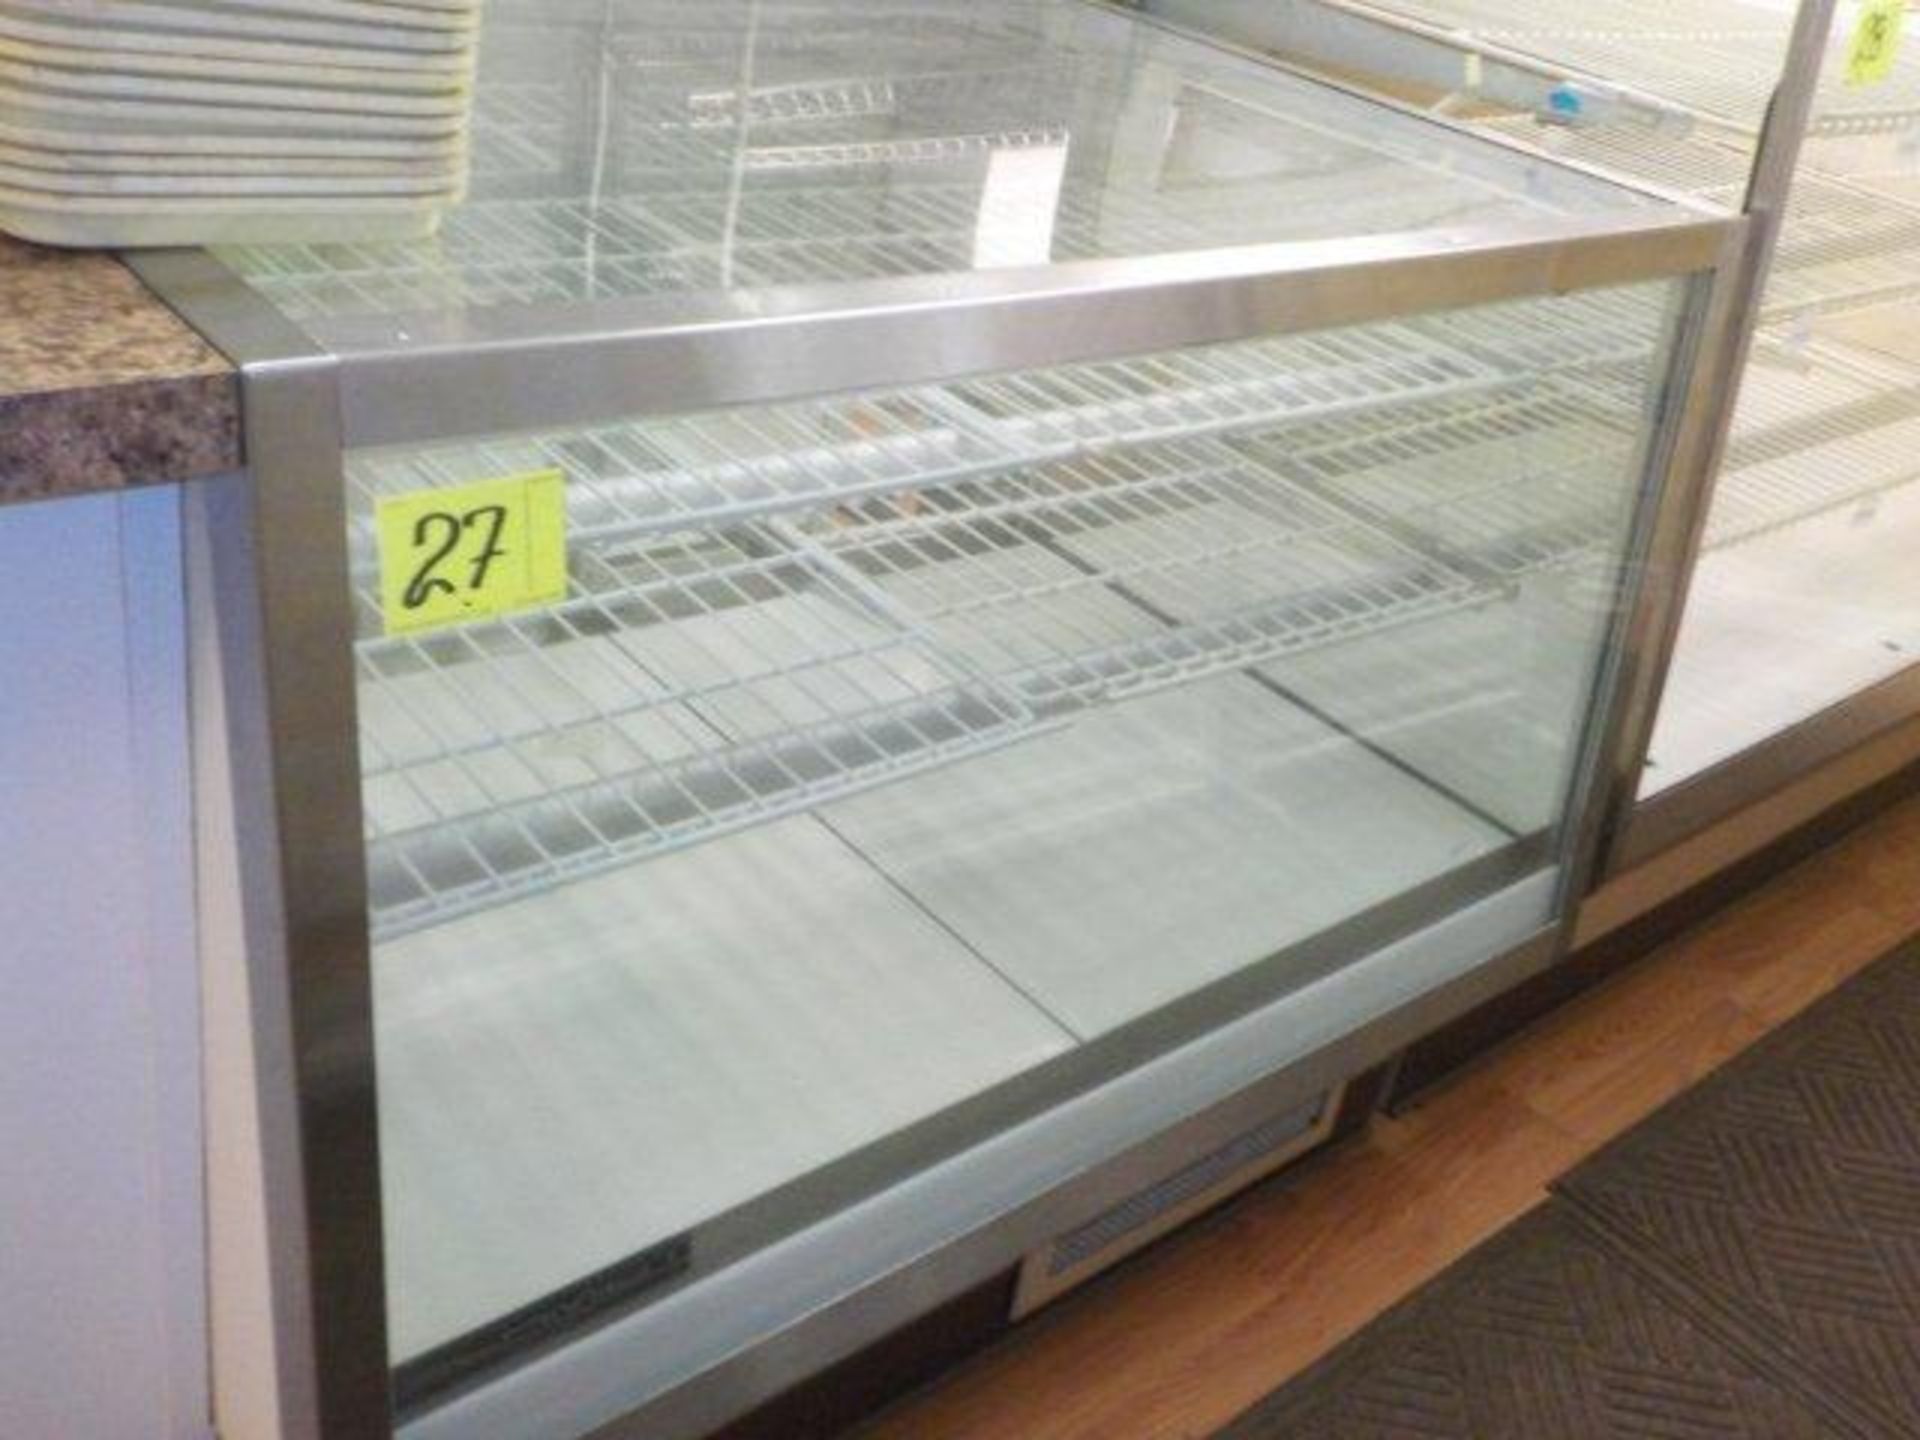 BAKERY CASE 4 FT, REFRIGERATED